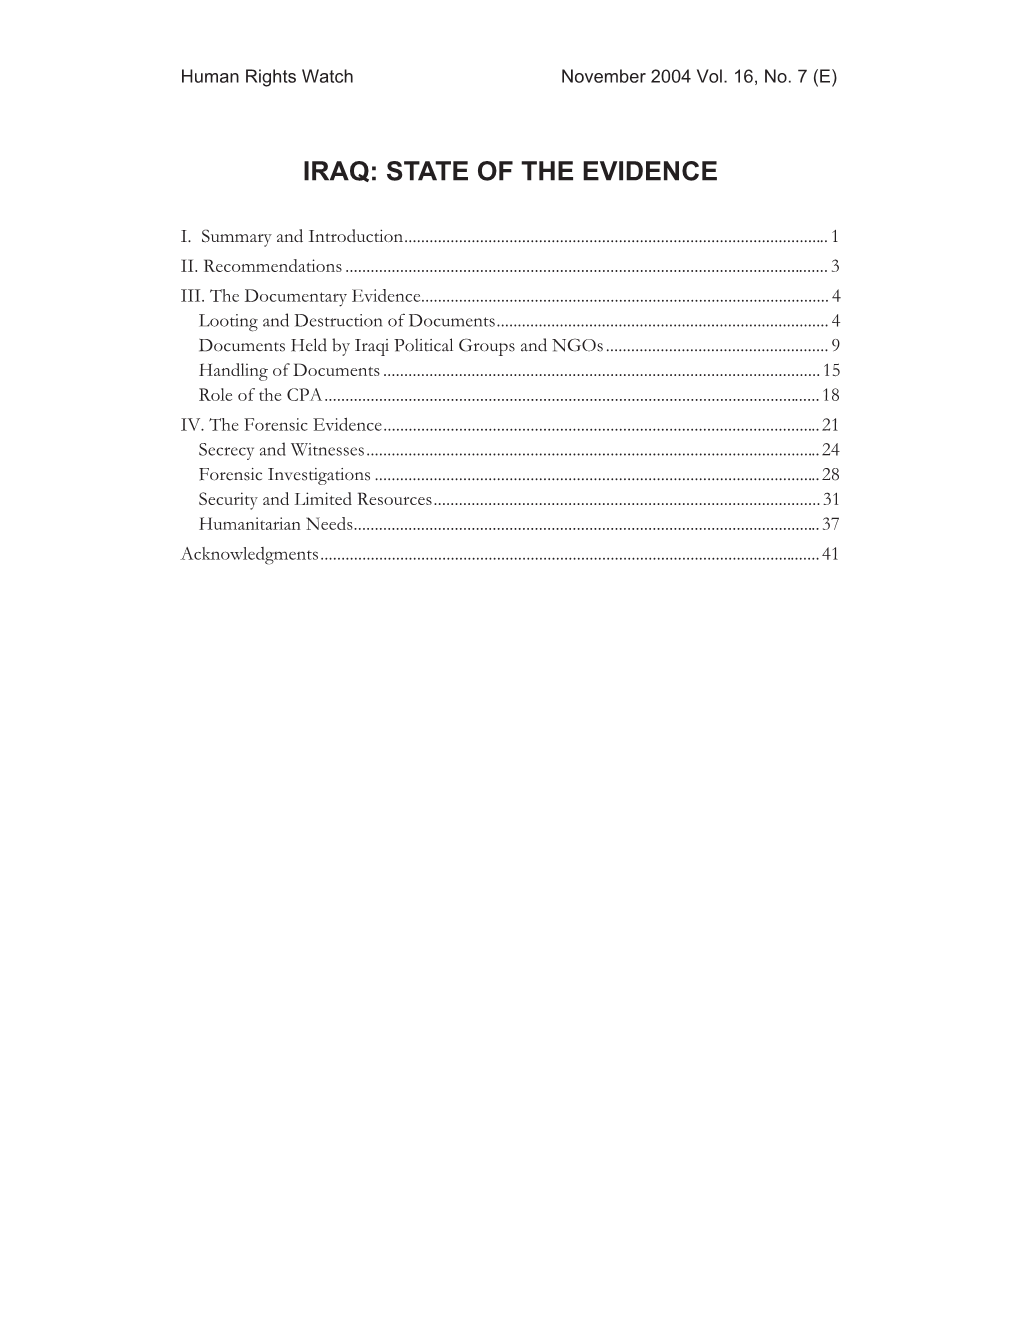 Iraq: State of the Evidence